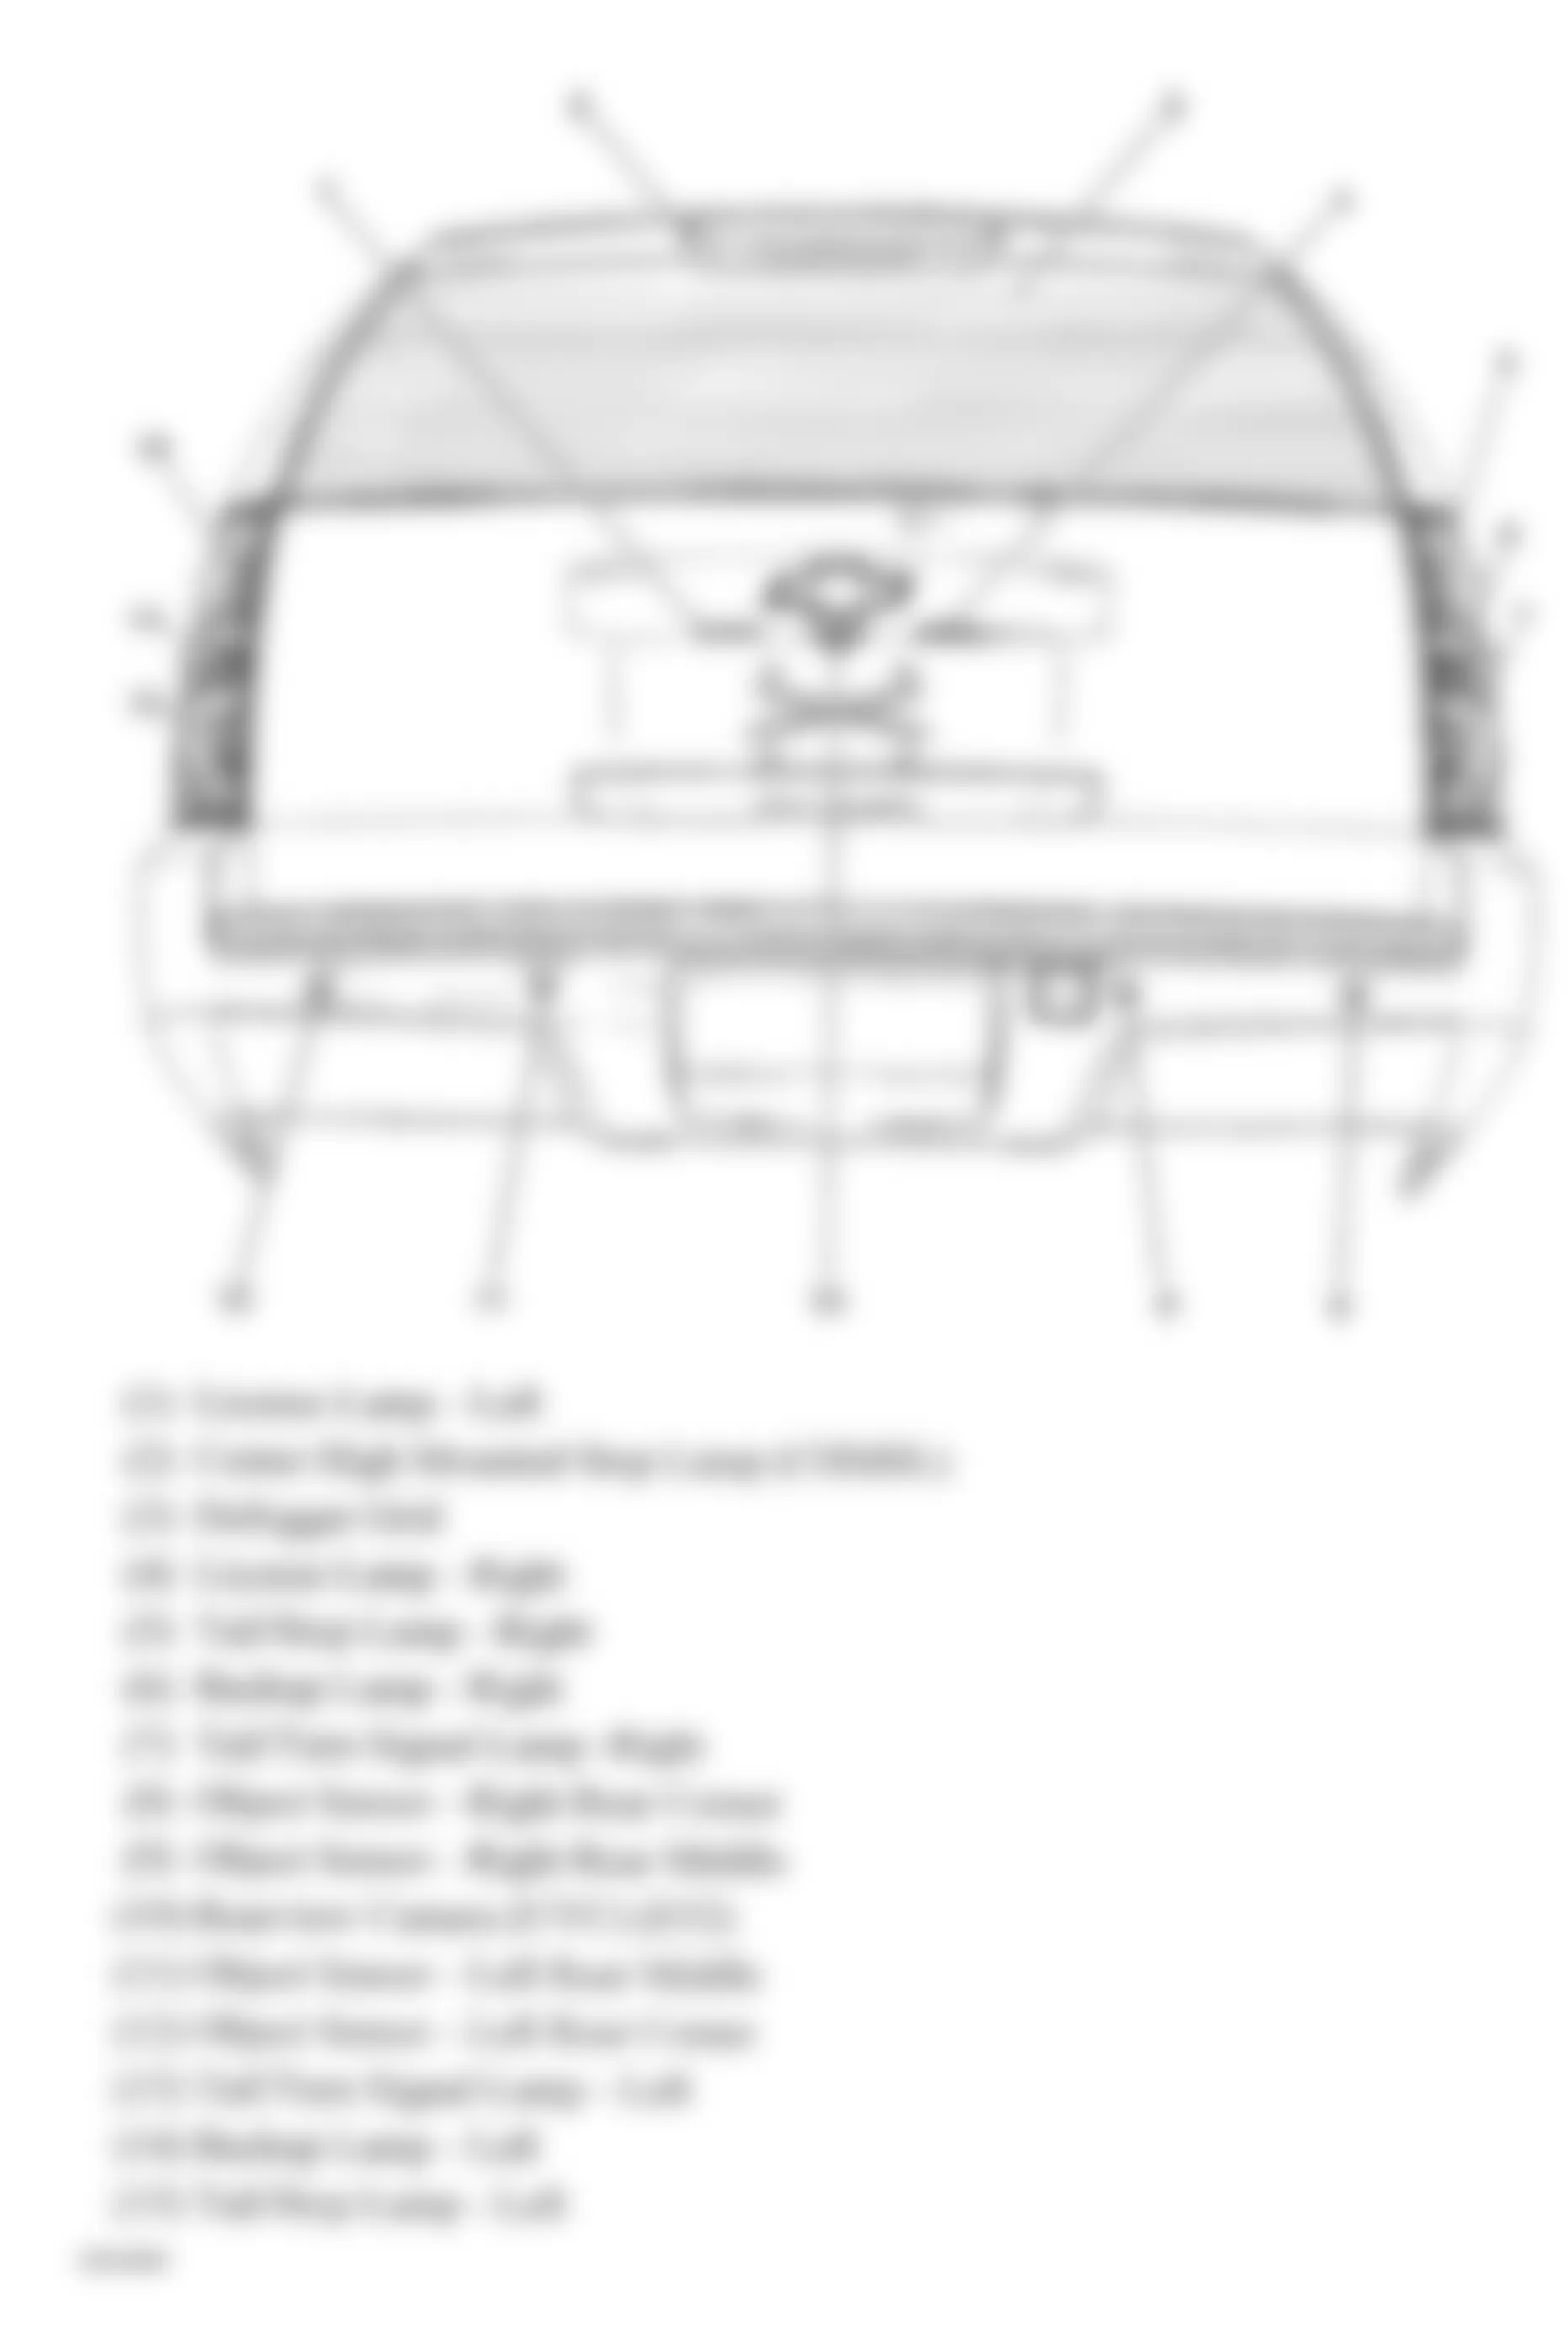 GMC Yukon Hybrid 2008 - Component Locations -  Rear Of Vehicle (Avalanche, Suburban & Tahoe W/One Piece Liftgate)